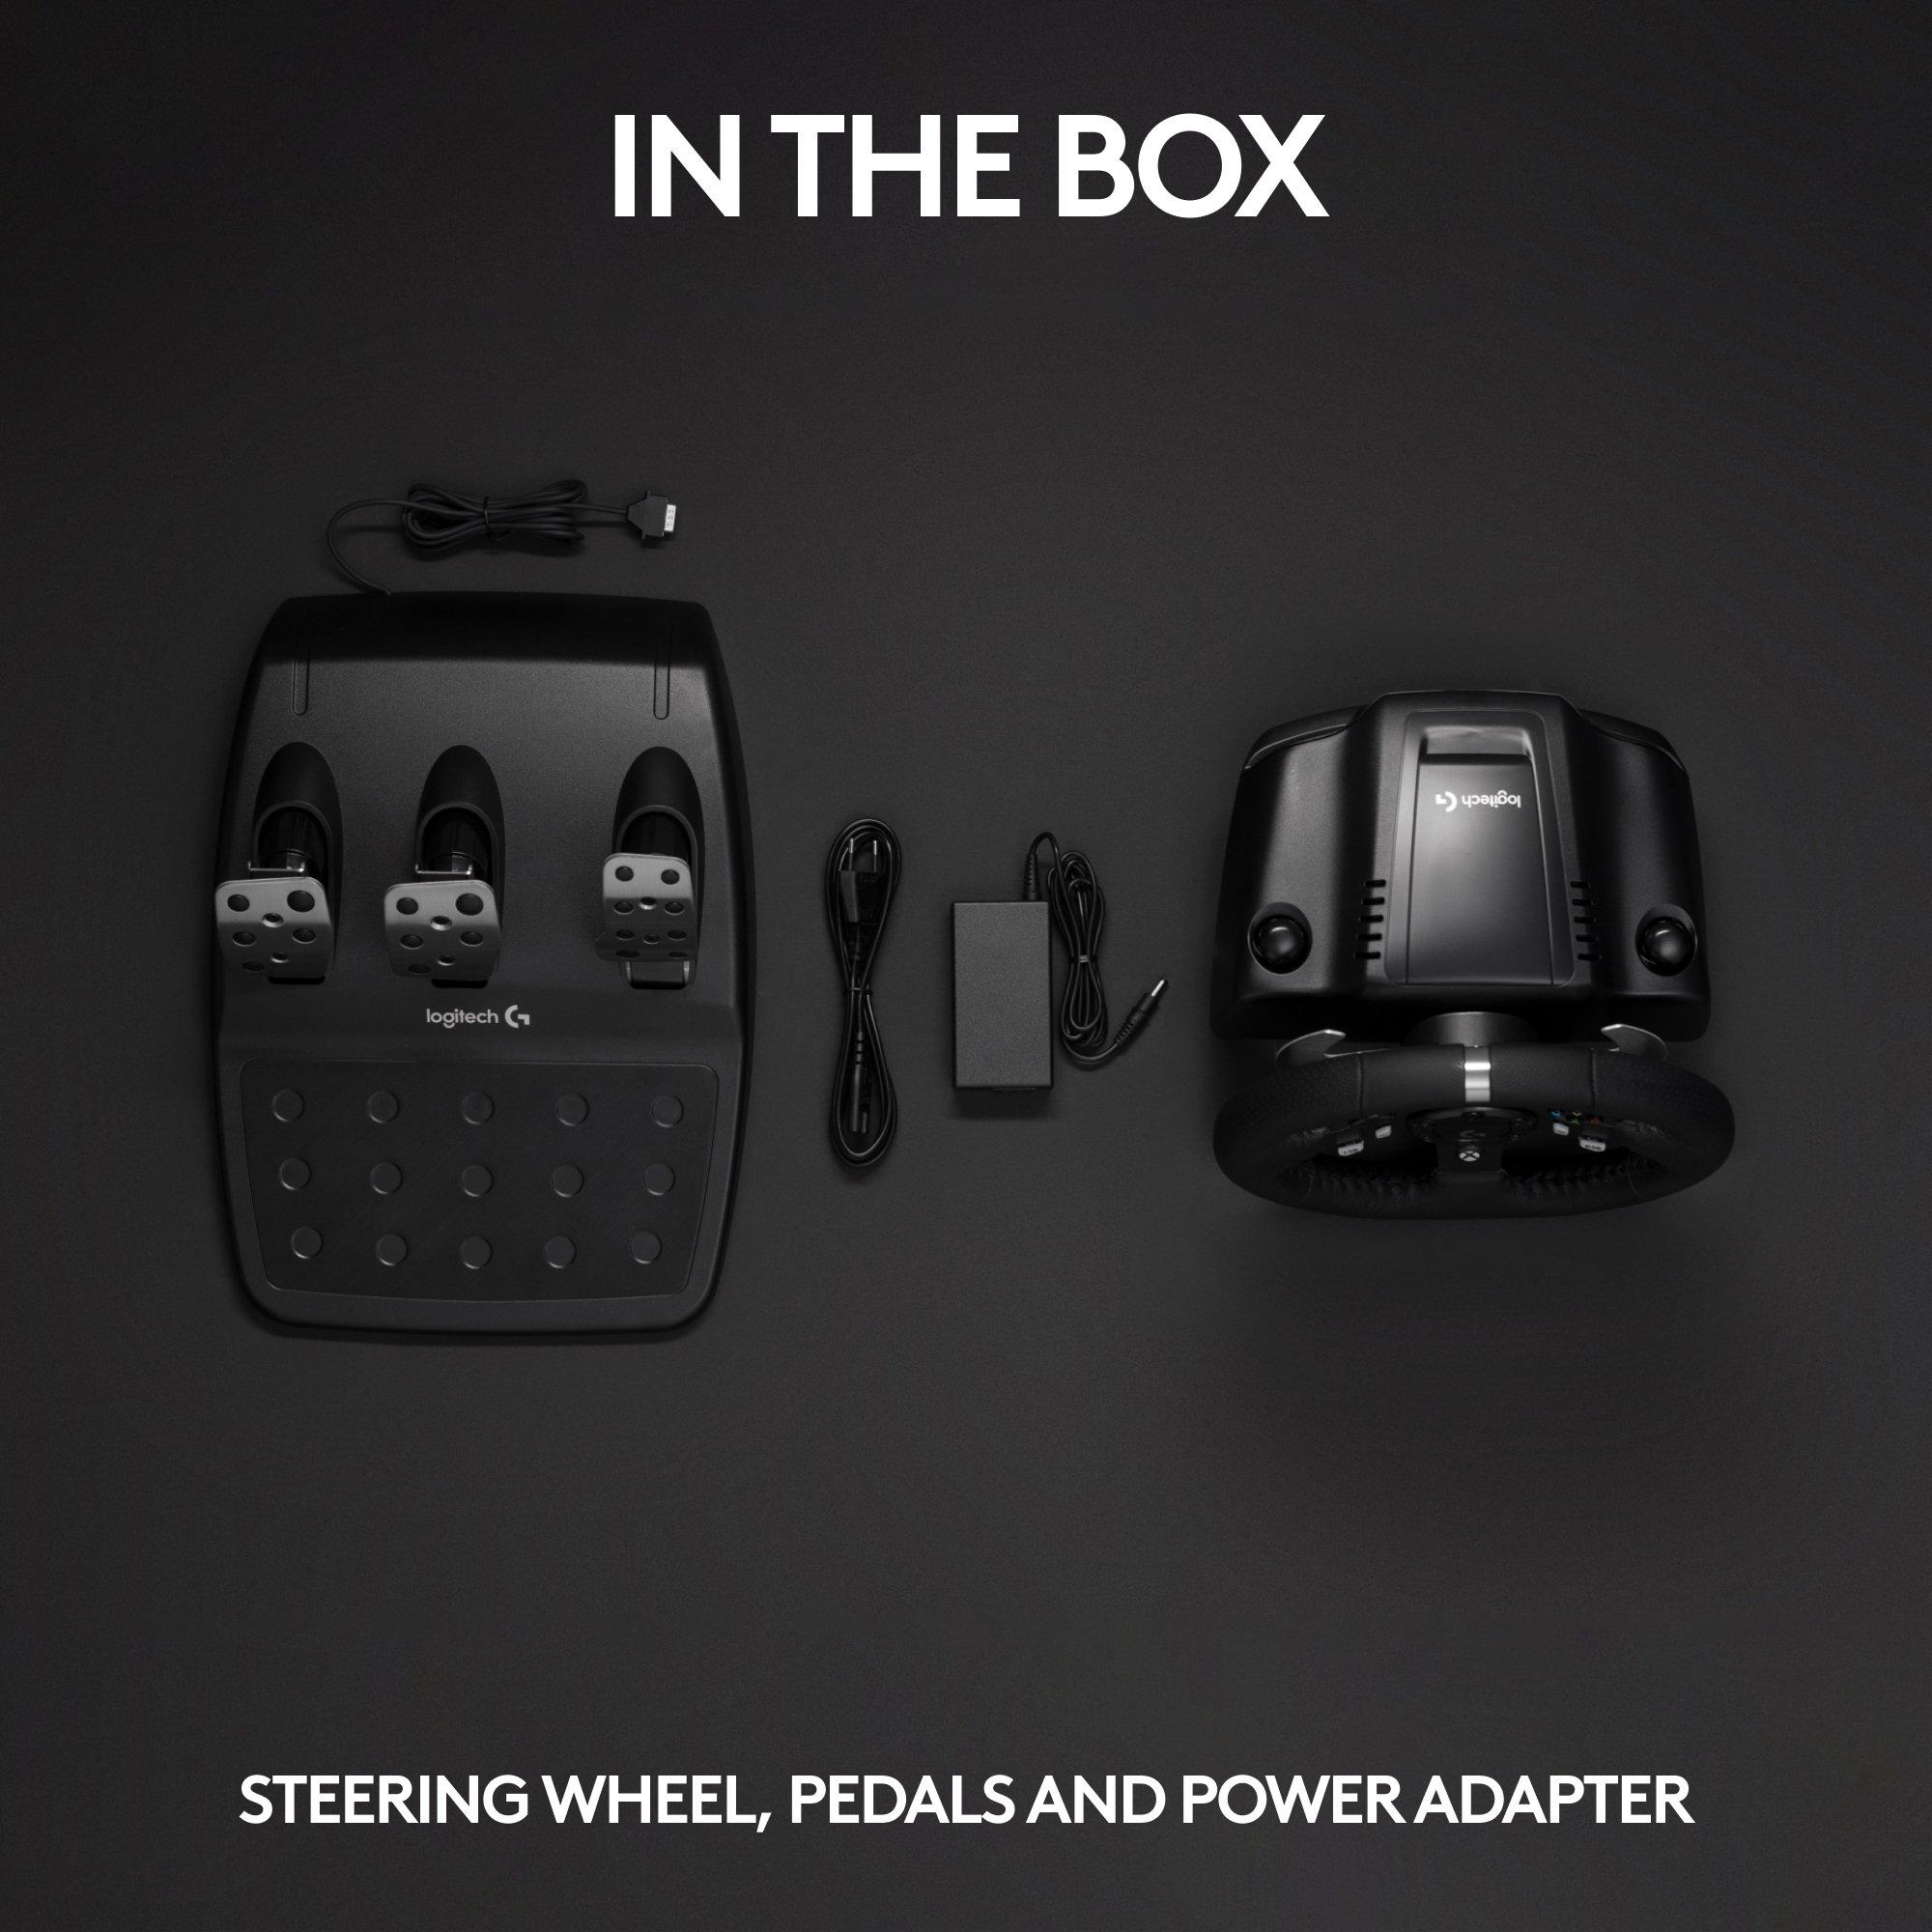 https://media.gamestop.com/i/gamestop/10126519_ALT02/Logitech-G920-Driving-Force-Racing-Wheel-for-Xbox-One-and-PC?$pdp$